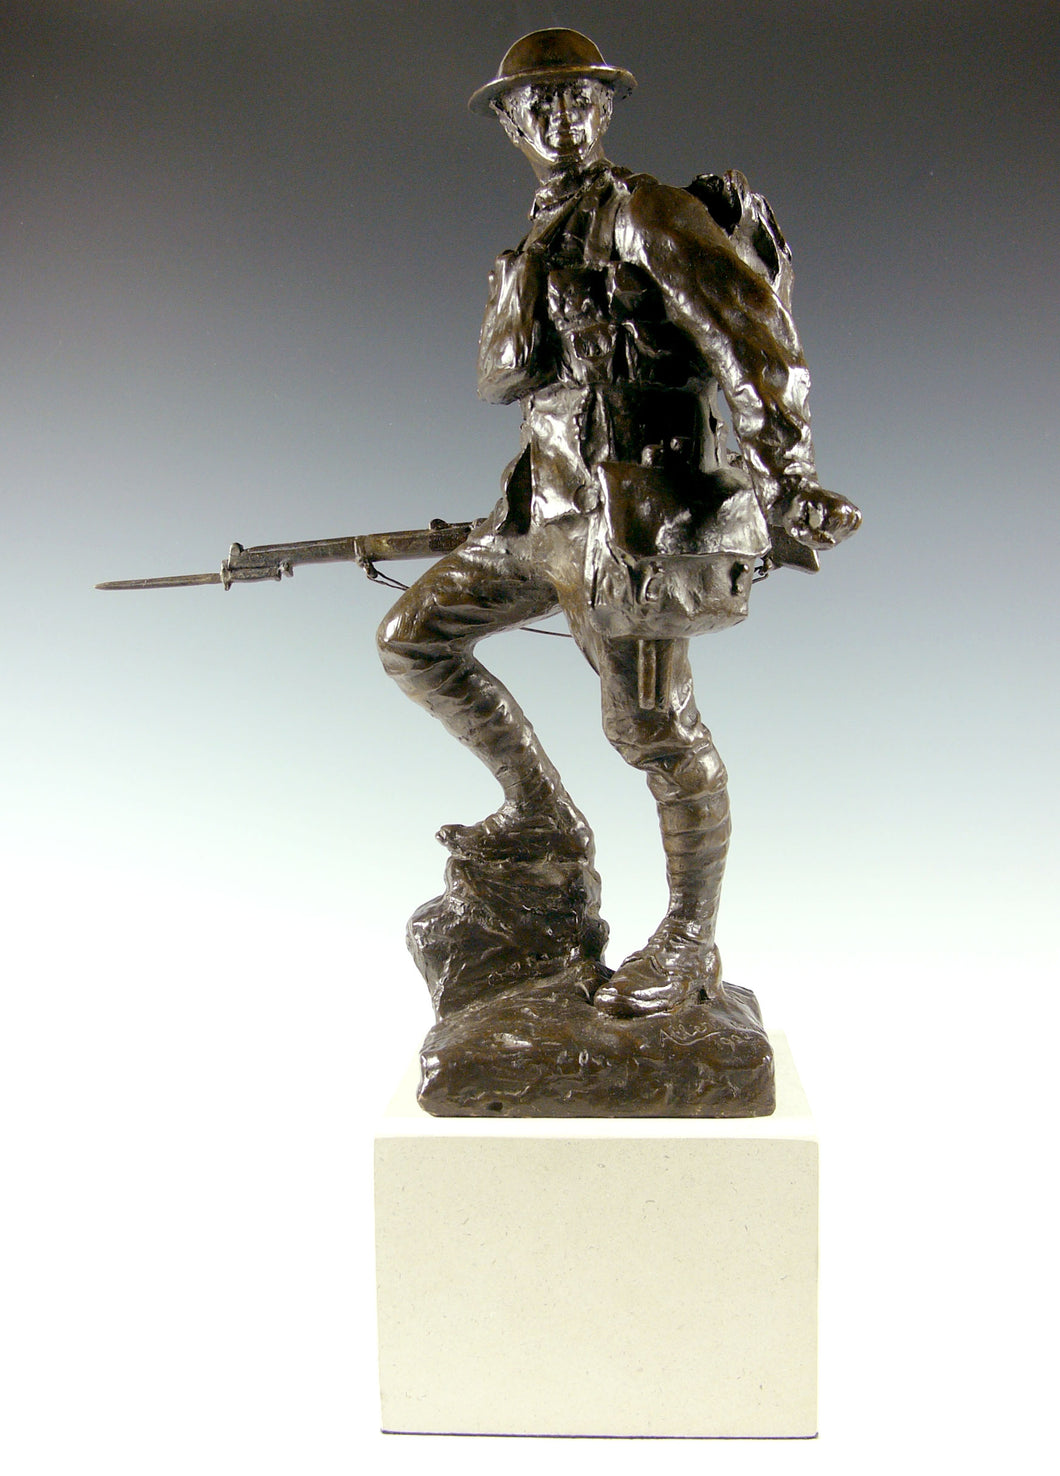 A Bronze Model of a British Infantryman by Albert Toft, Signed and dated 1920